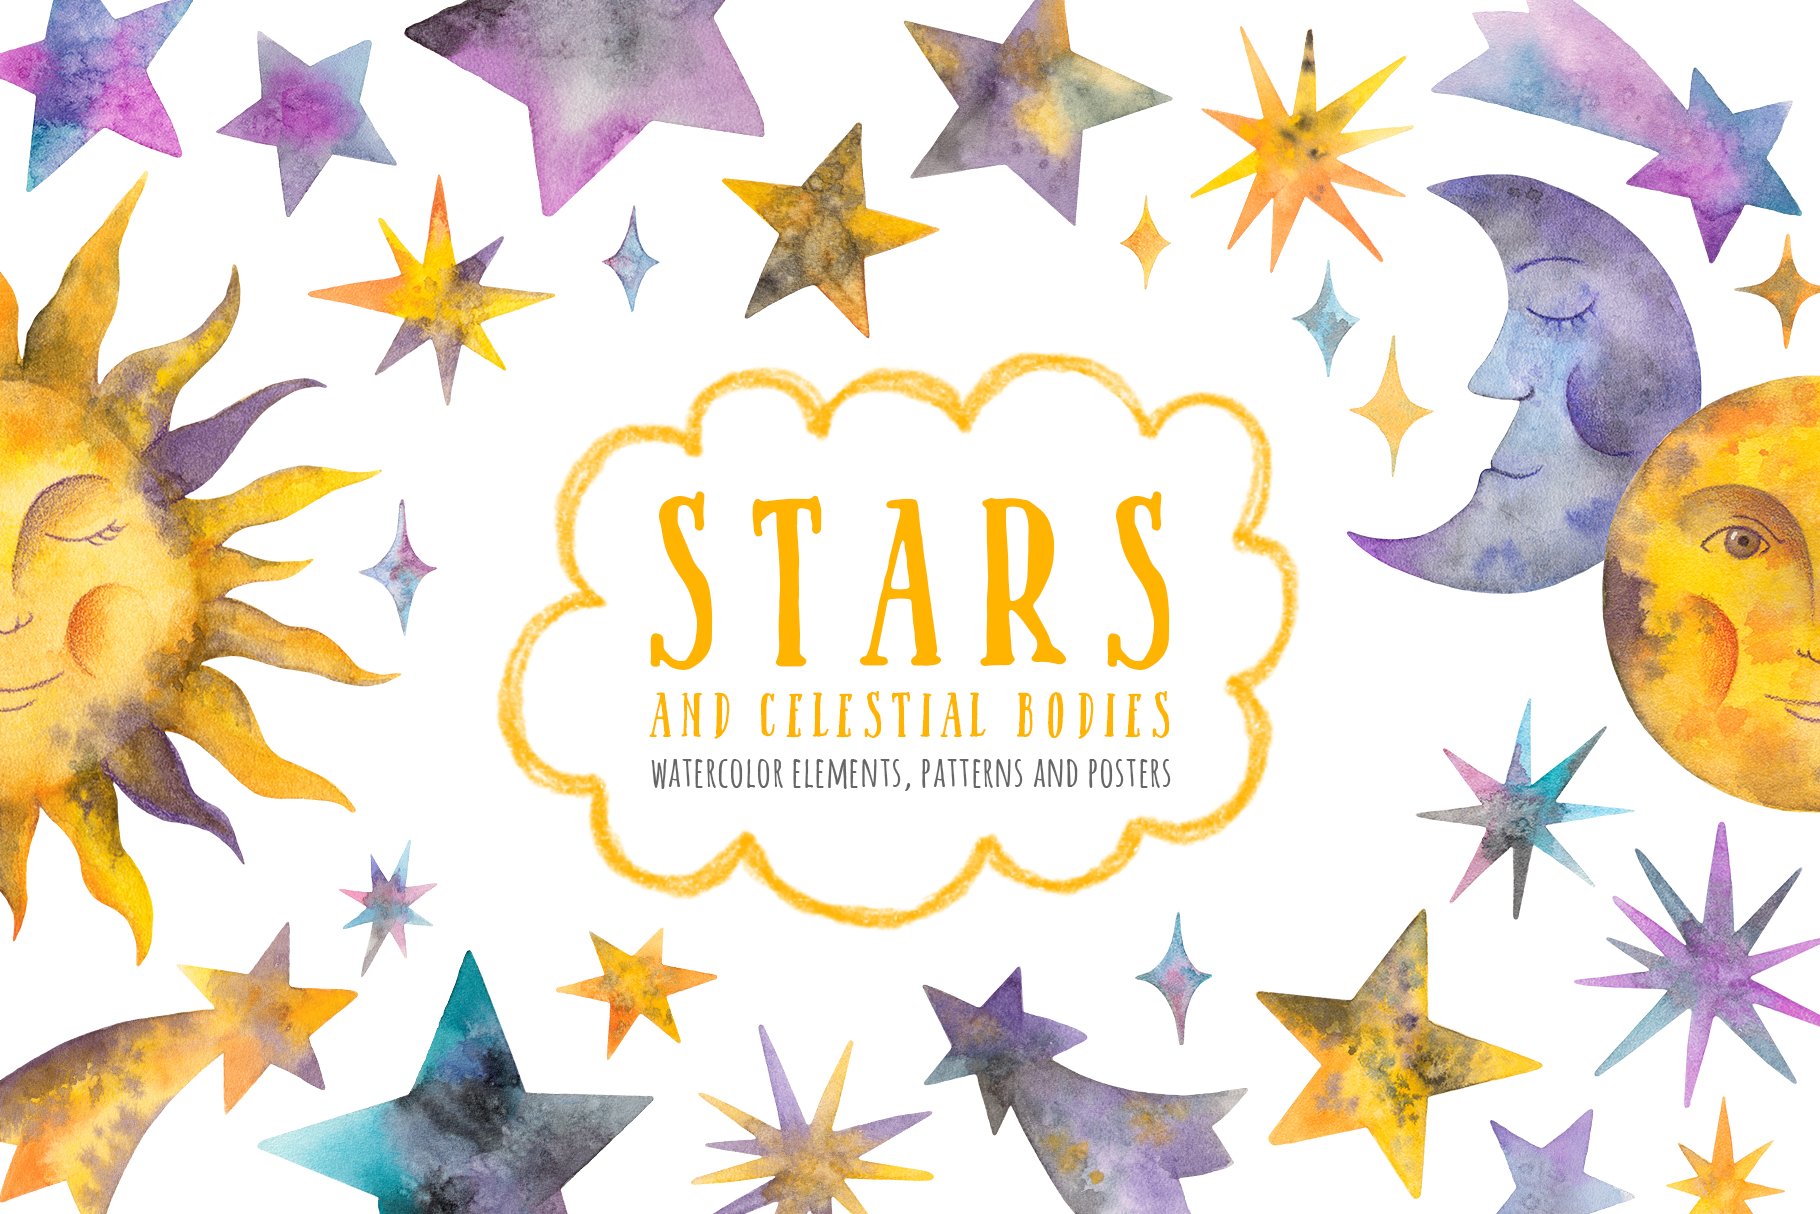 Watercolor Stars & Celestial Bodies preview image.